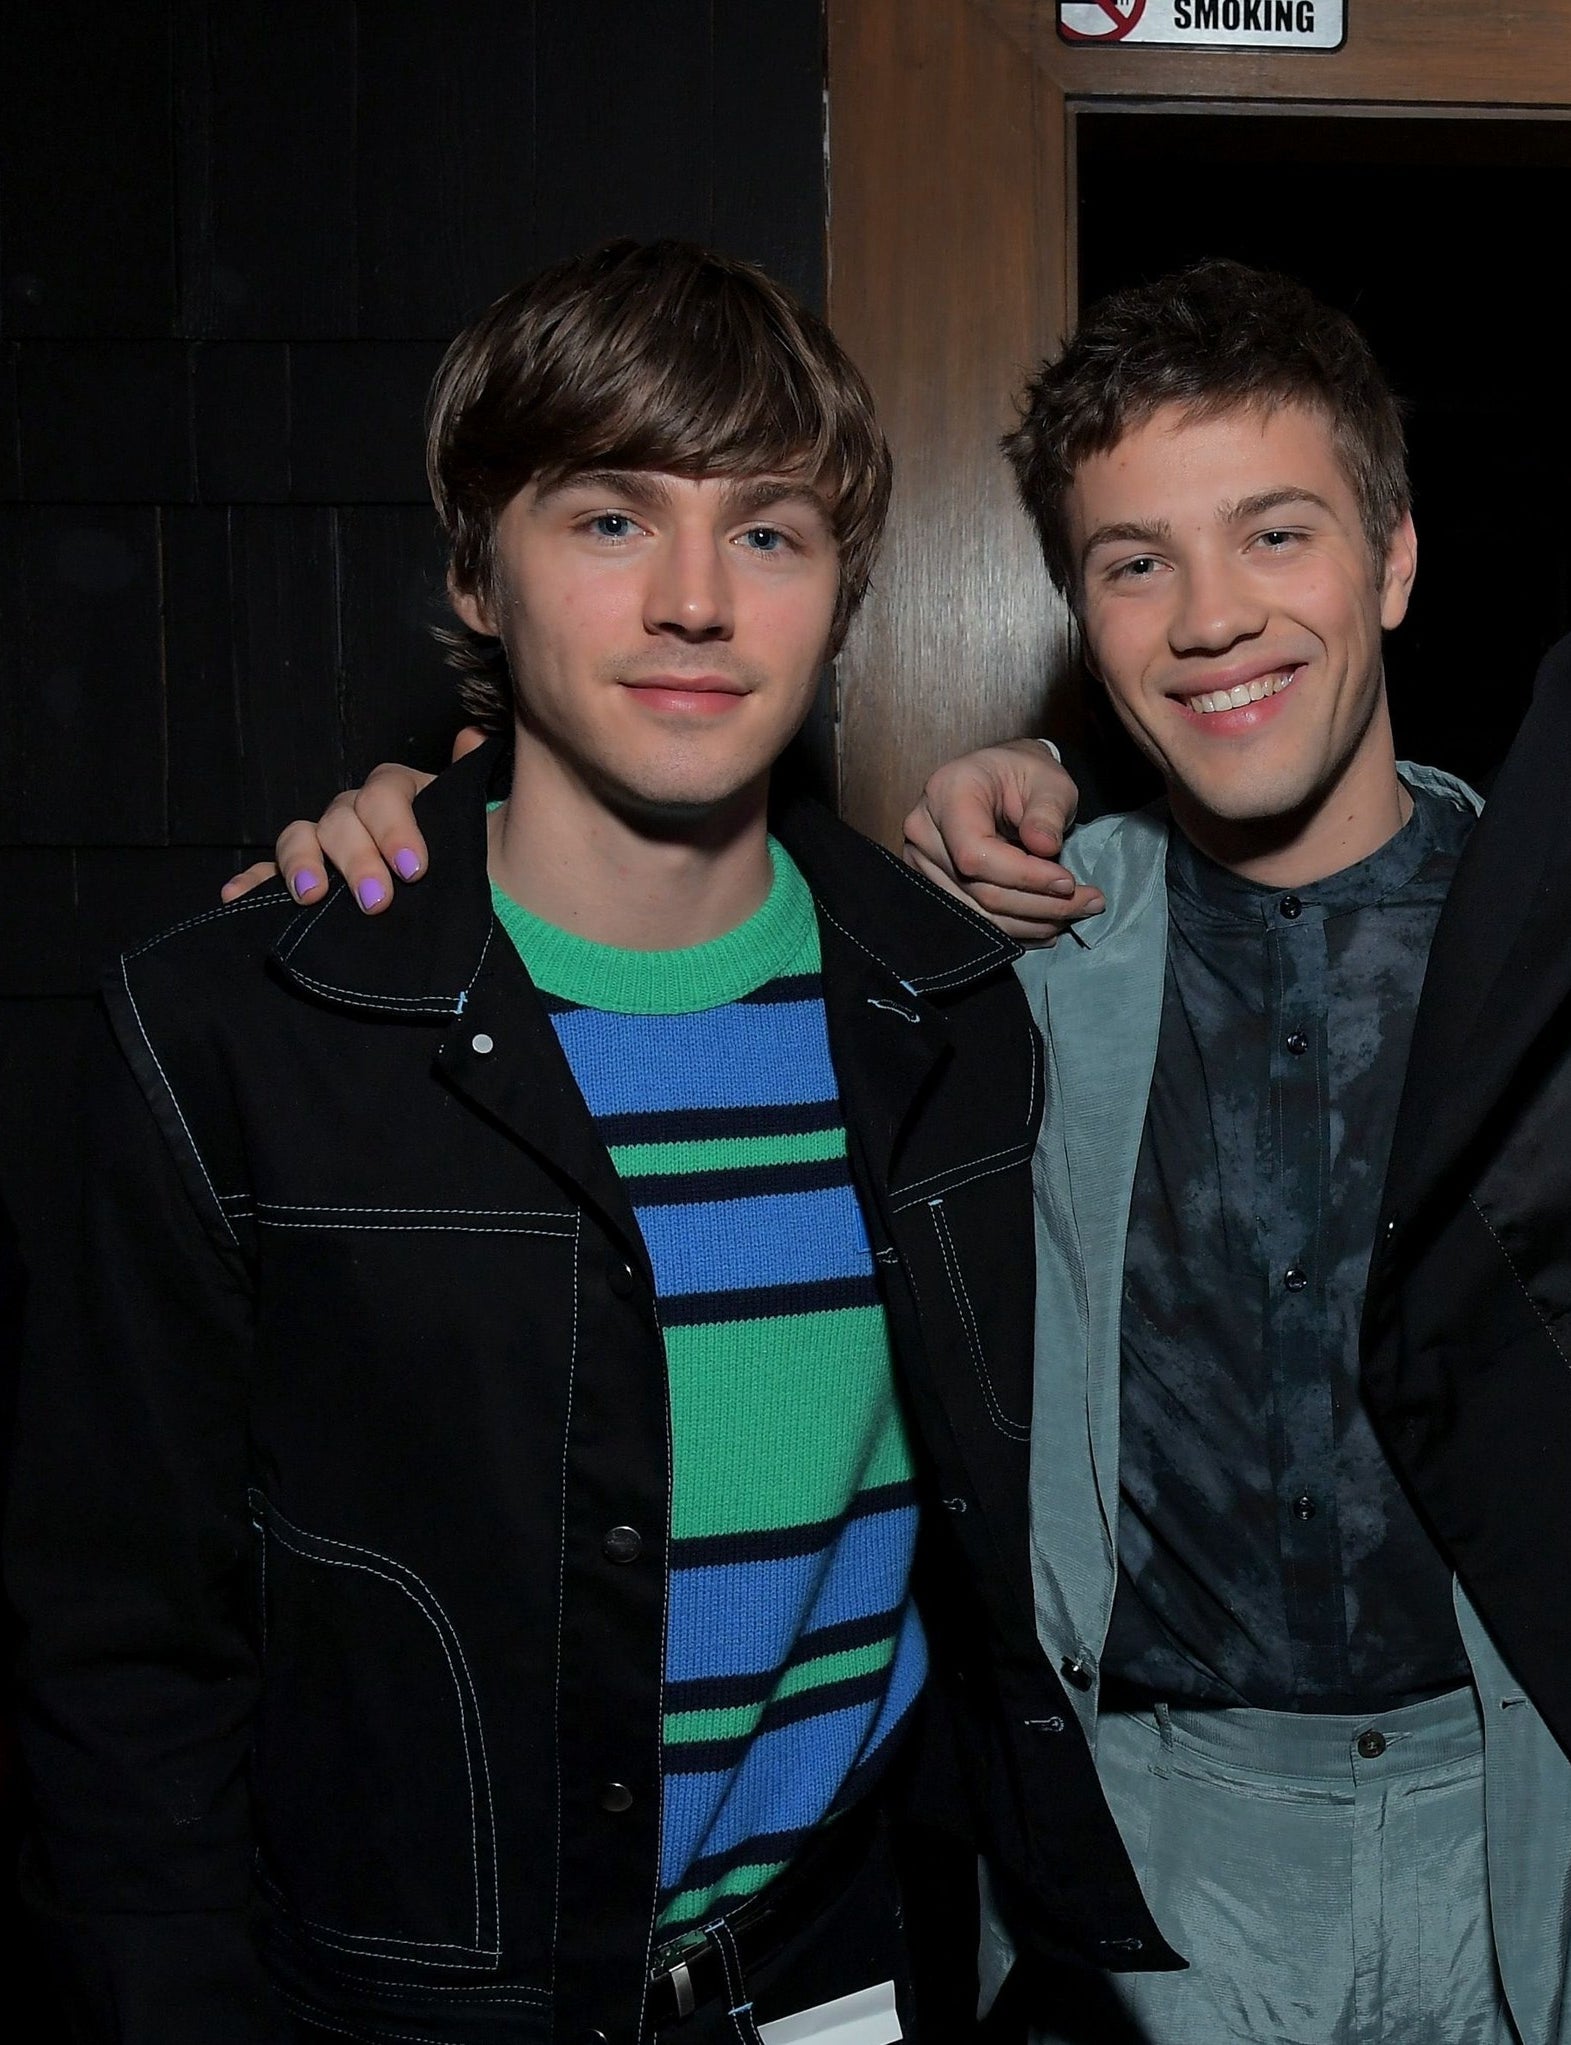 miles and connor at an event